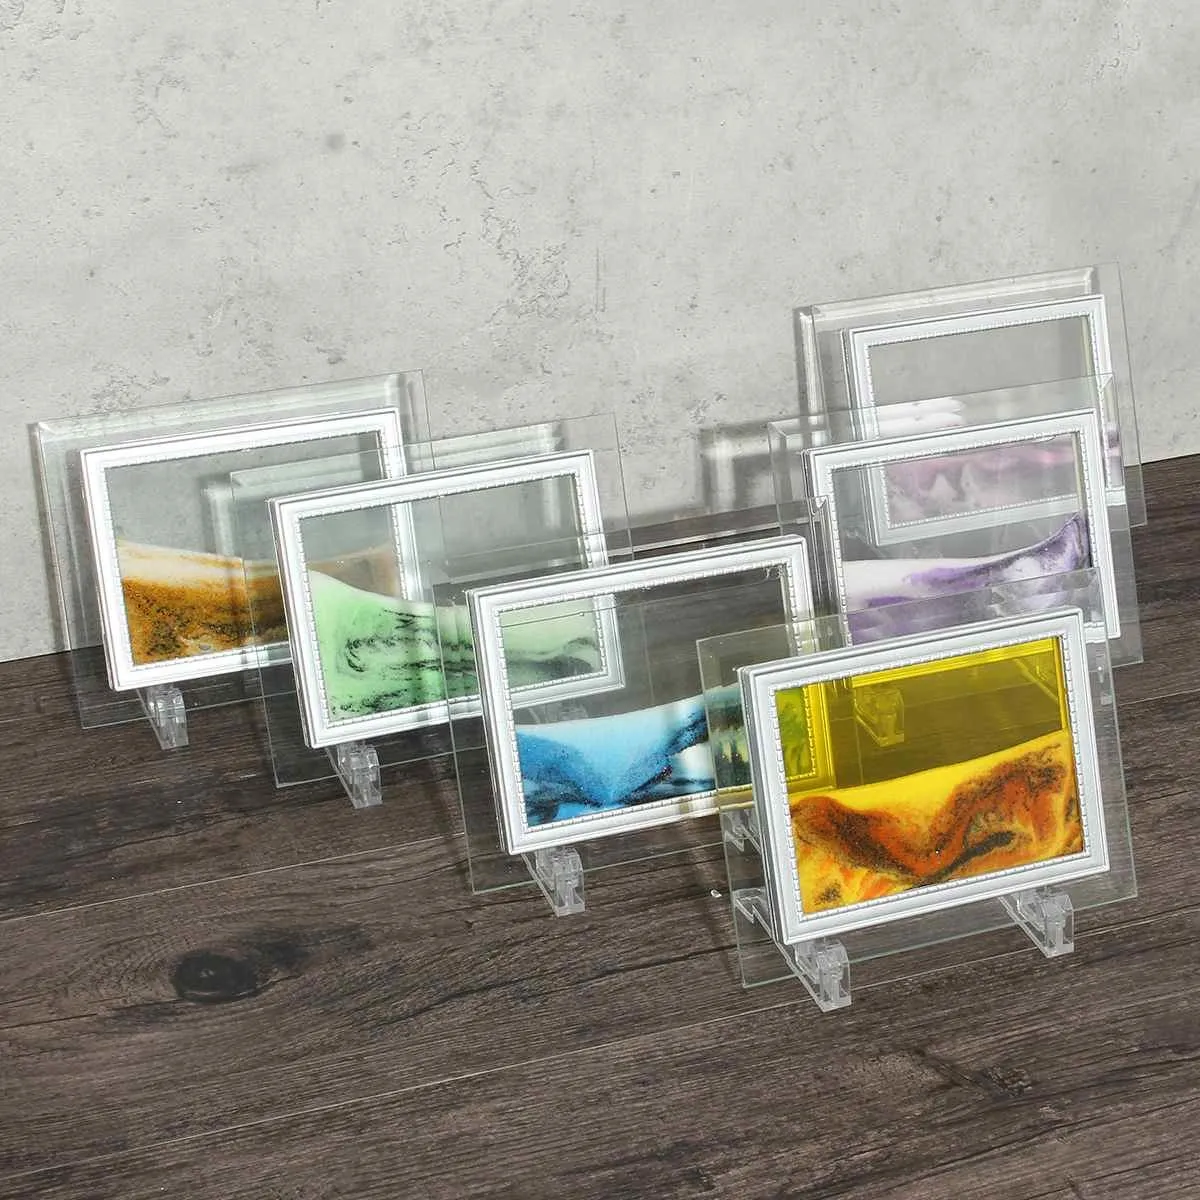 13X17cm Framed Moving Sand Time Liquid Landscape Glass Picture Home Office Ornaments Decoration Accessories Craft Art Gift LJ200904